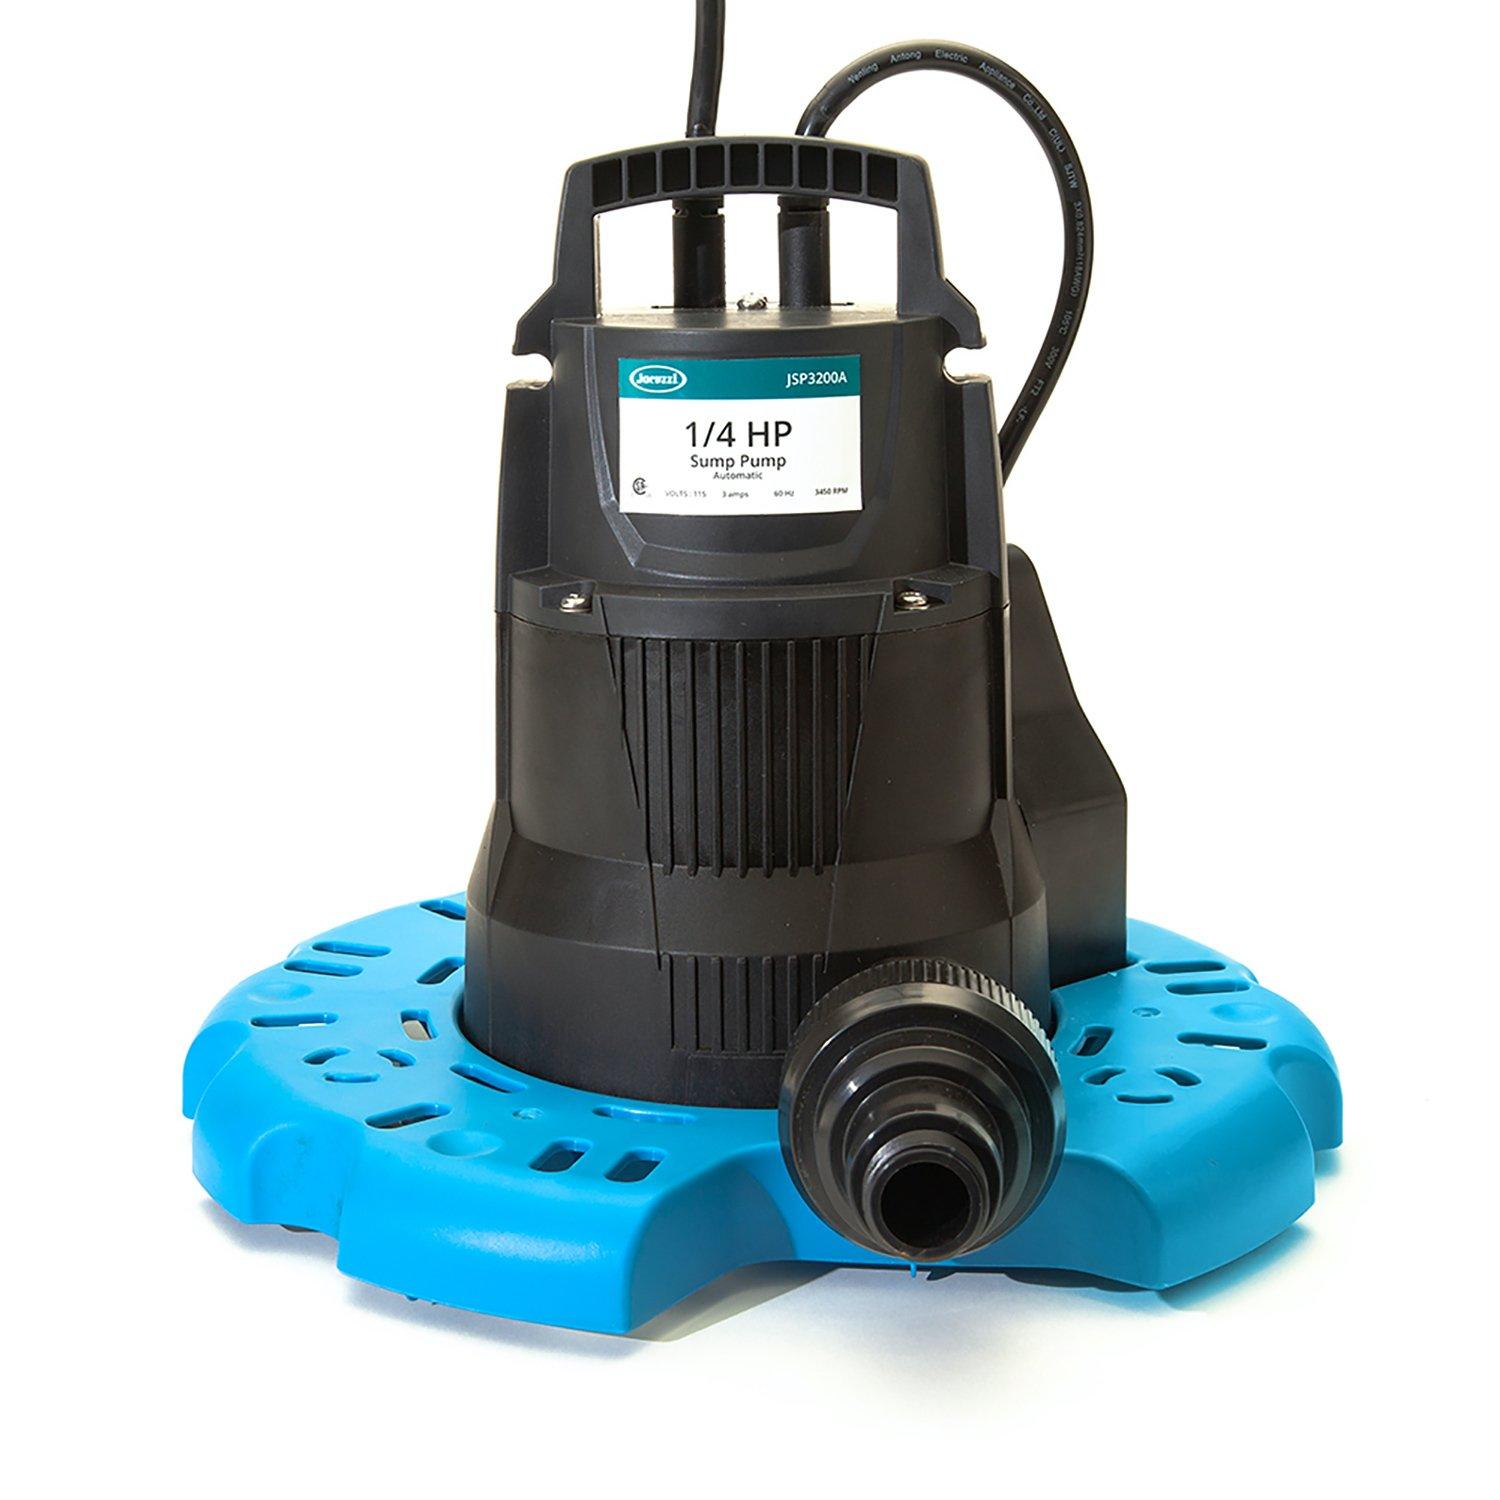 submersible pump for draining a pool